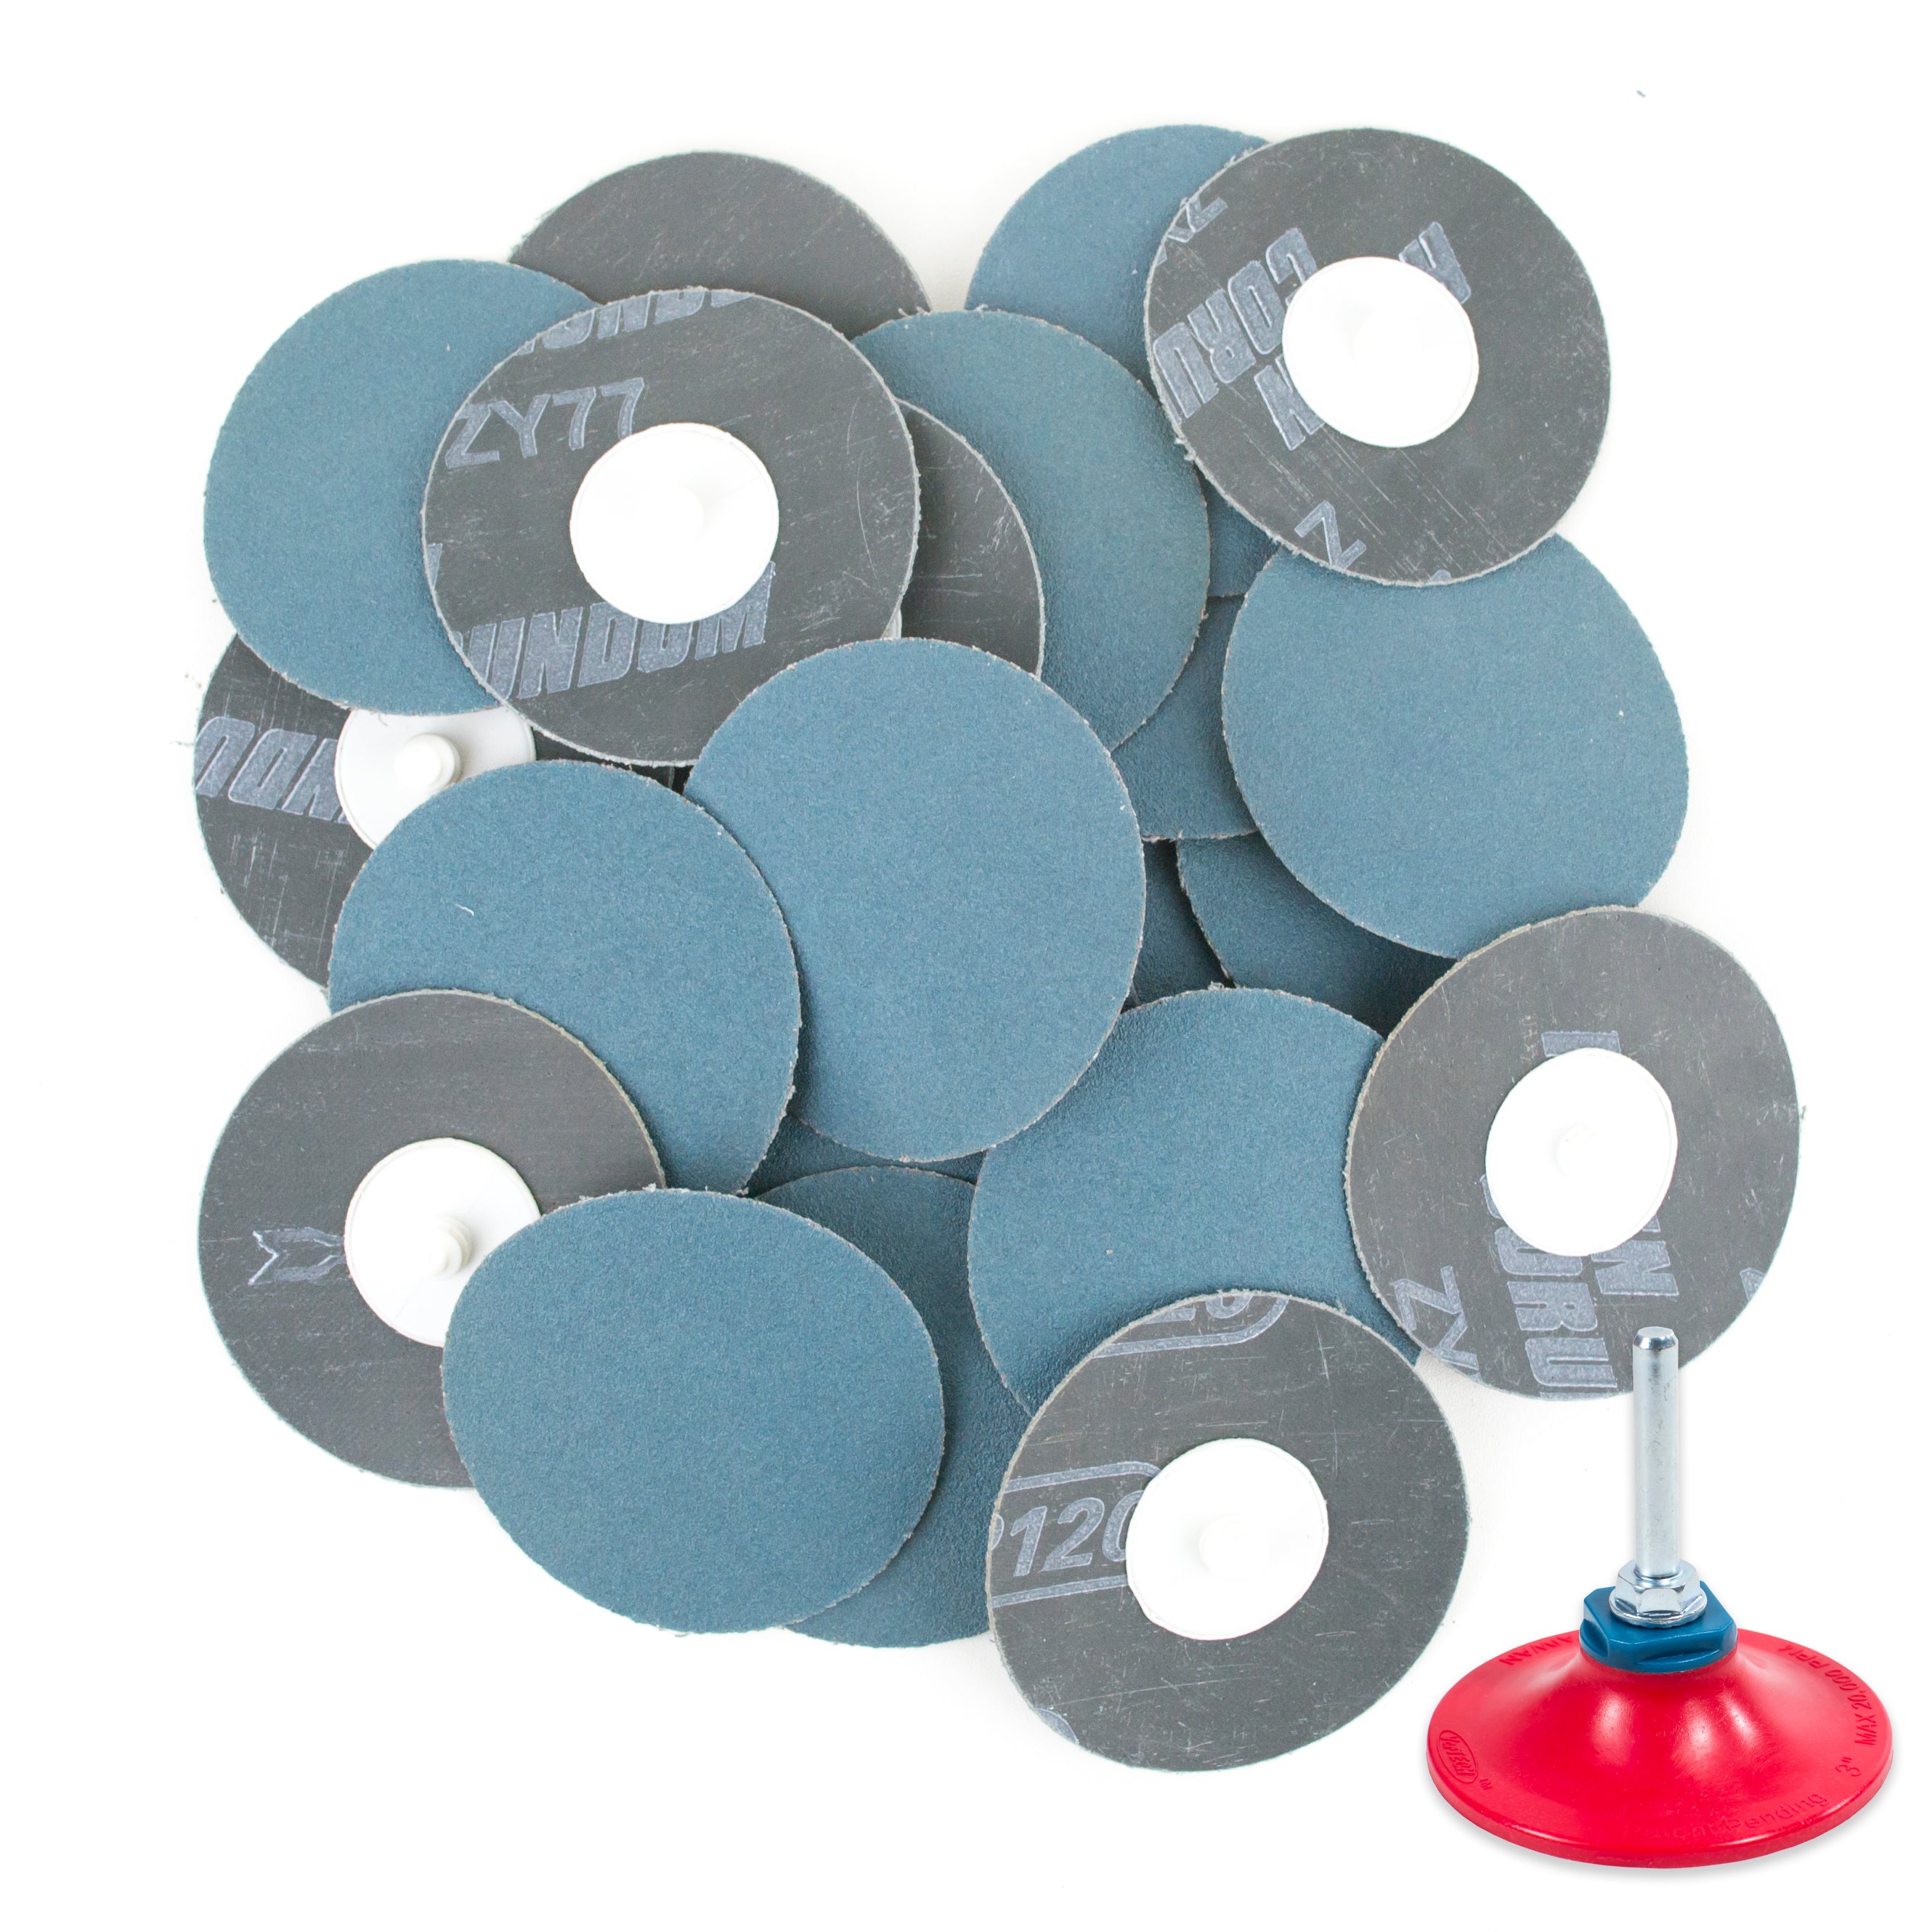 3 inch 120 Grit Zirconia “Roloc” Roll-On Type Abrasive Sanding Discs (25 pcs) with Holder